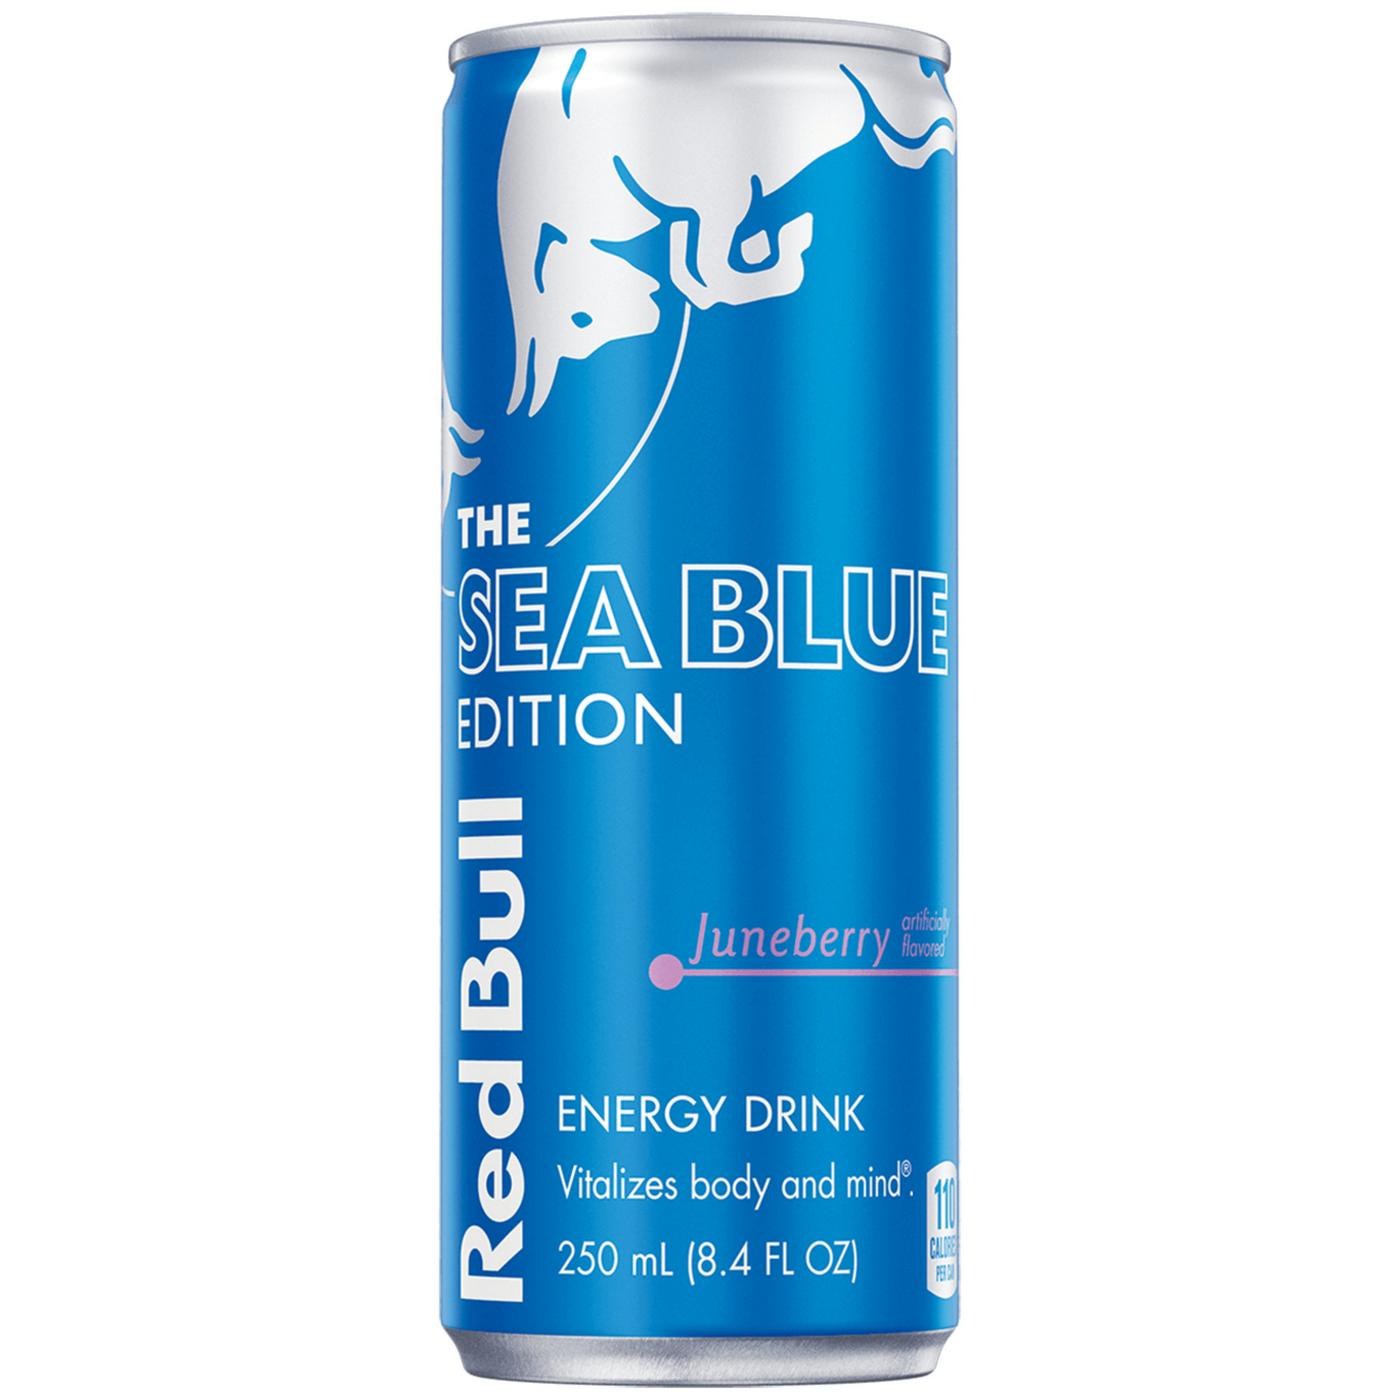 Red Bull Sea Blue Edition Juneberry Energy Drink; image 1 of 10